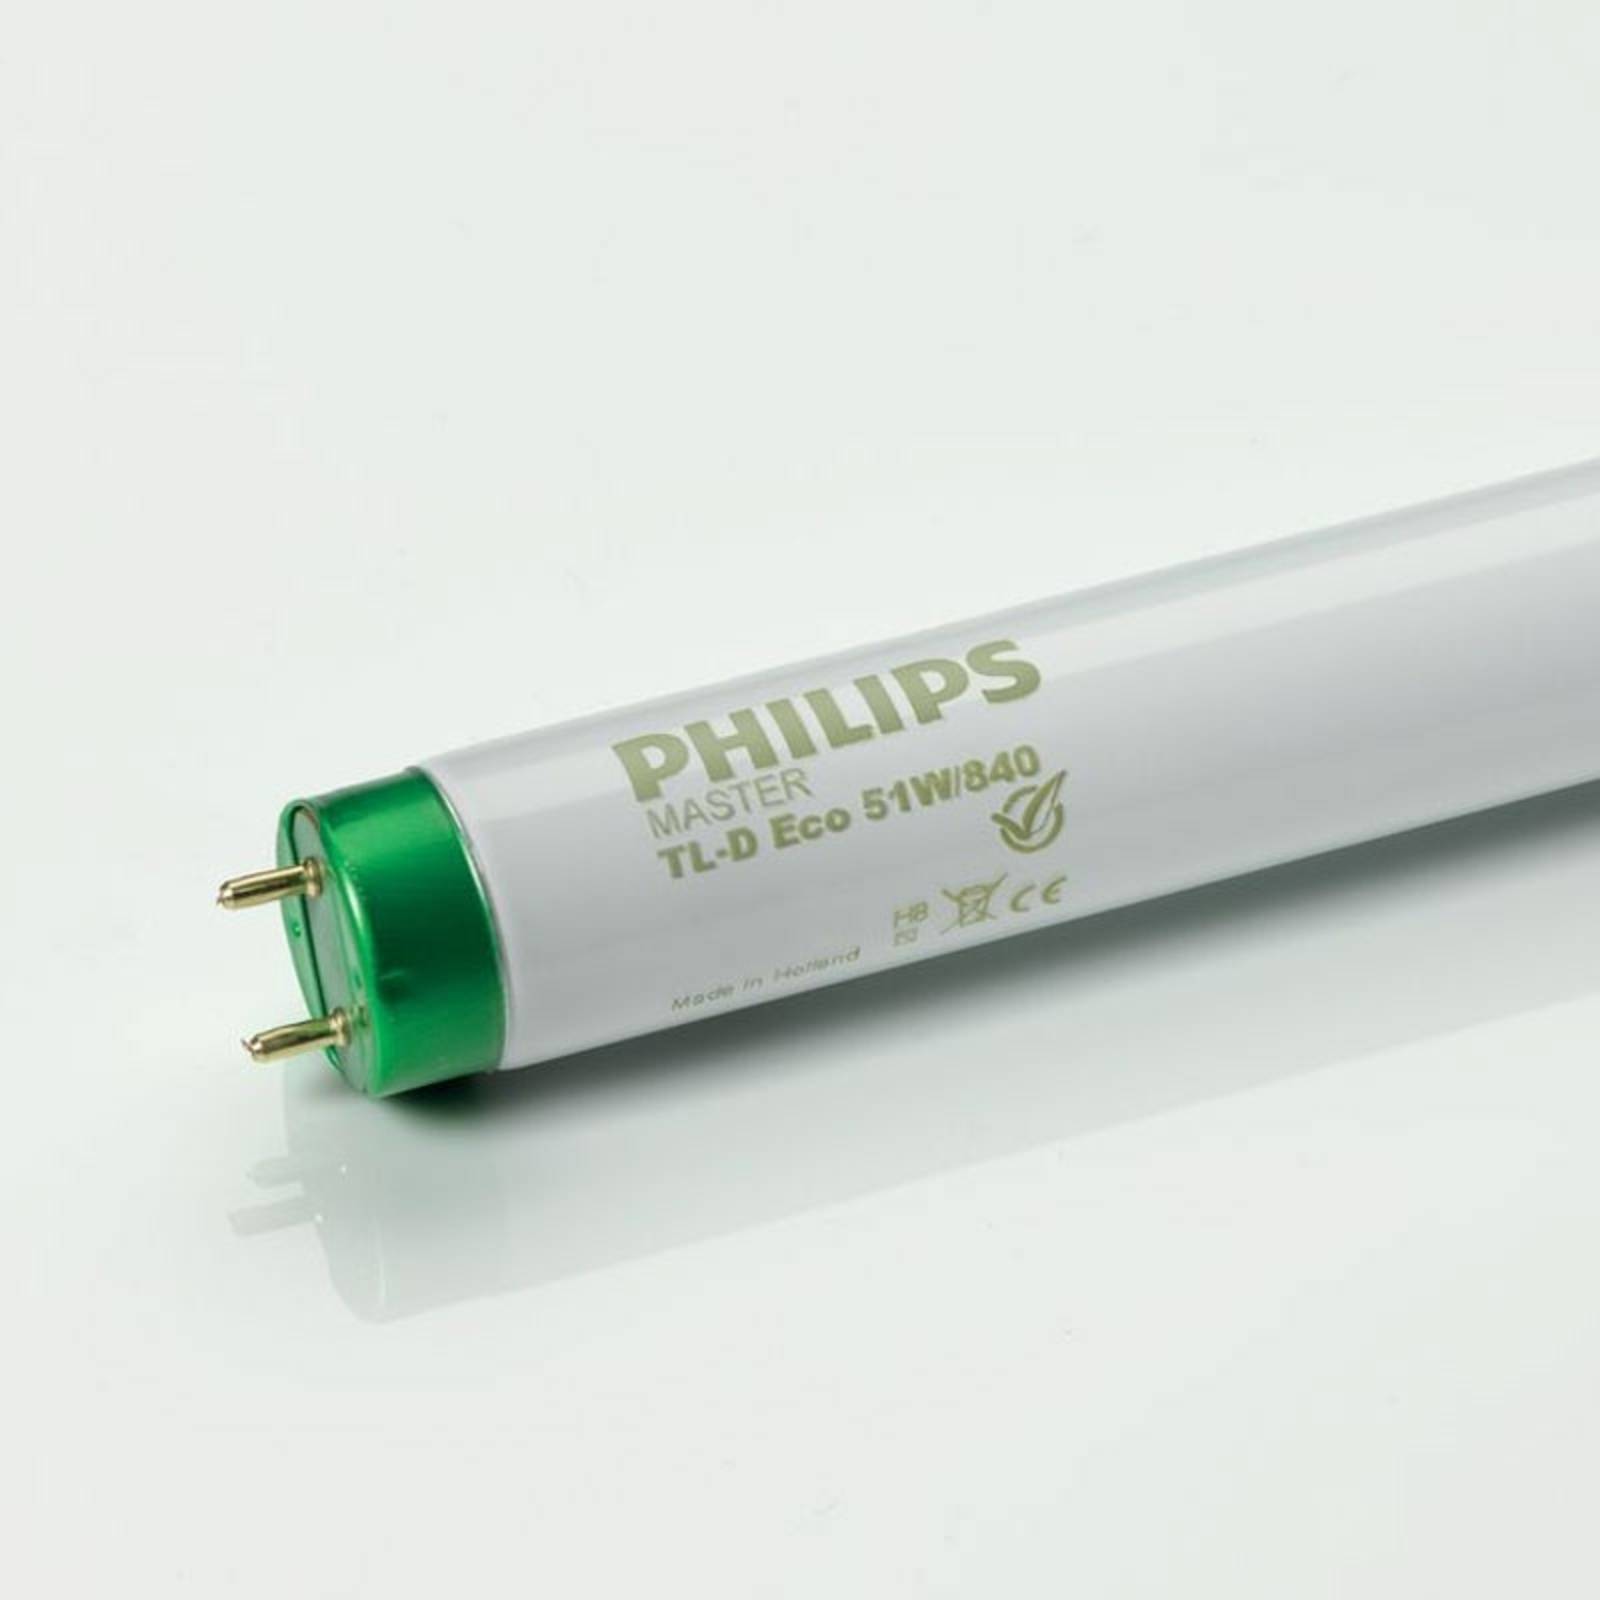 Image of Philips G13 T8 16W 840 Master TL-D Eco 8711500268617